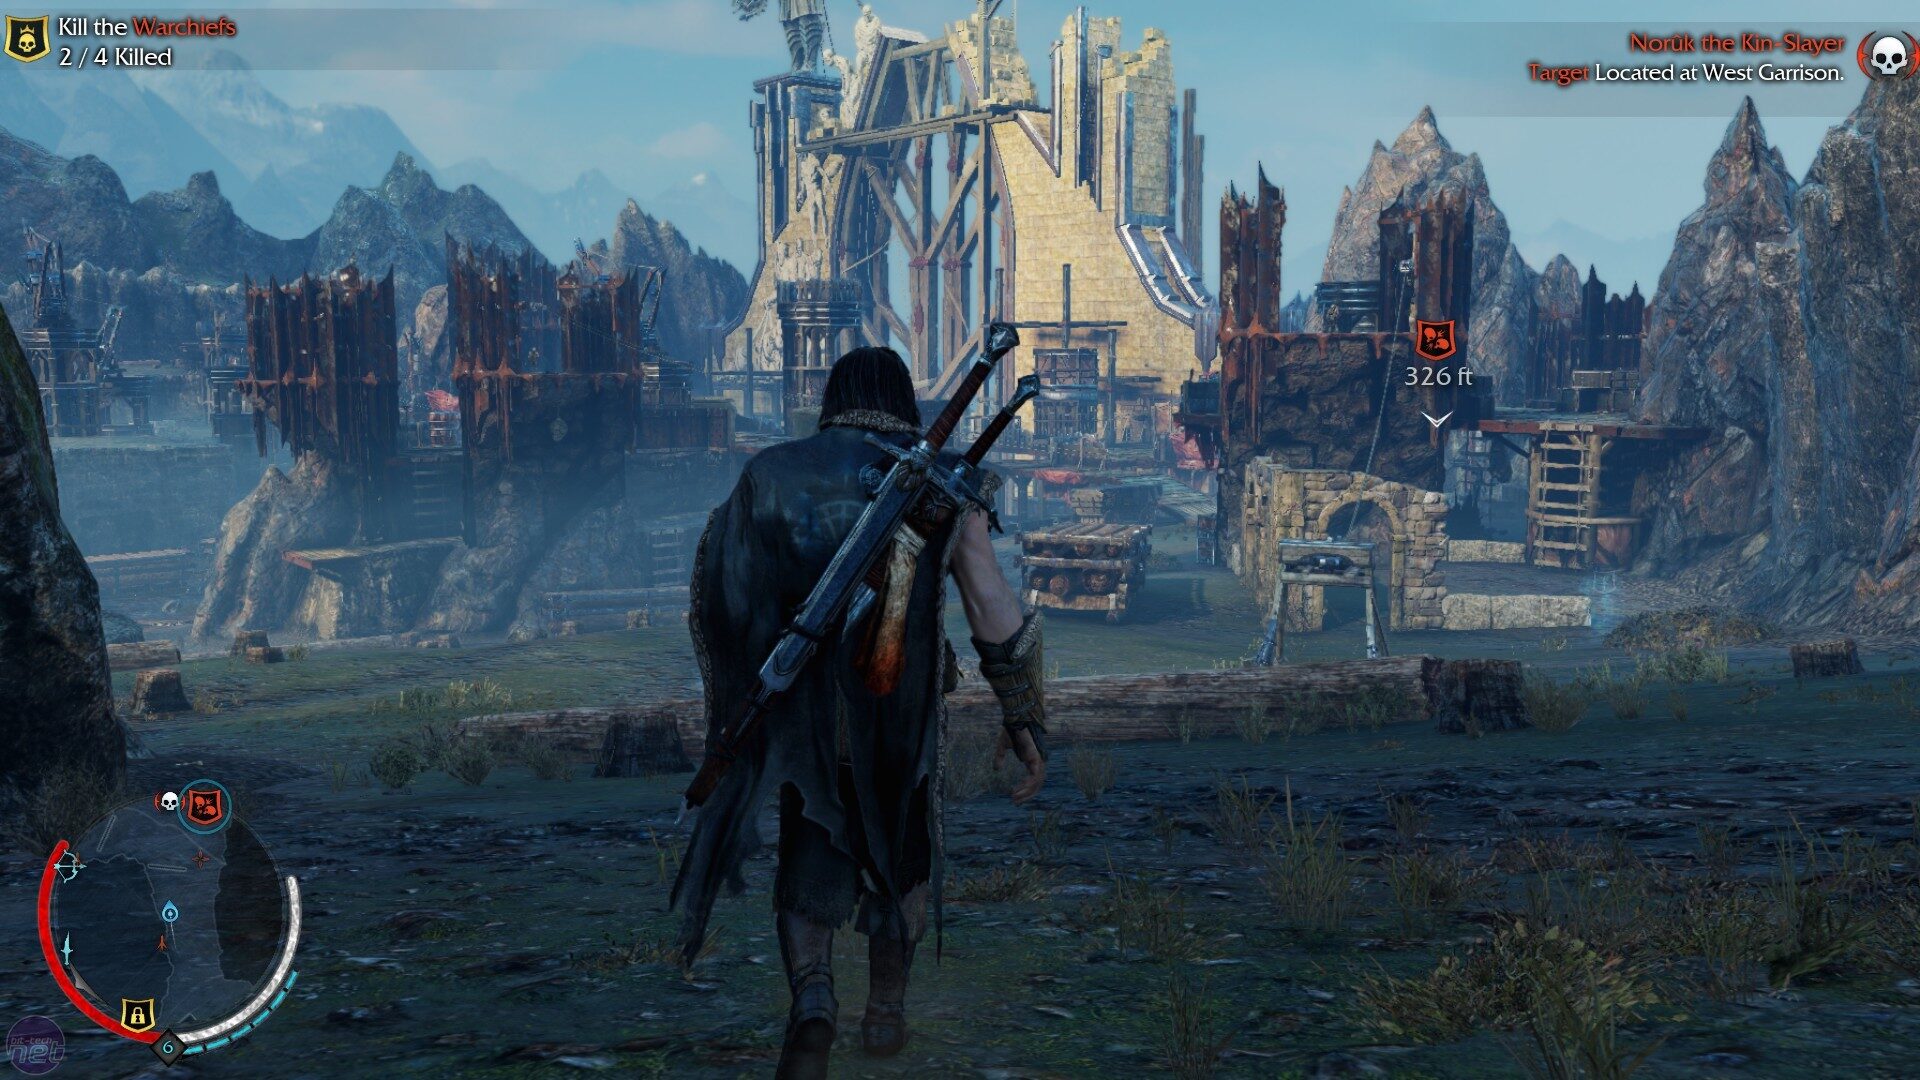 Middle Earth: Shadow of Mordor (Chaves de jogos) for free!